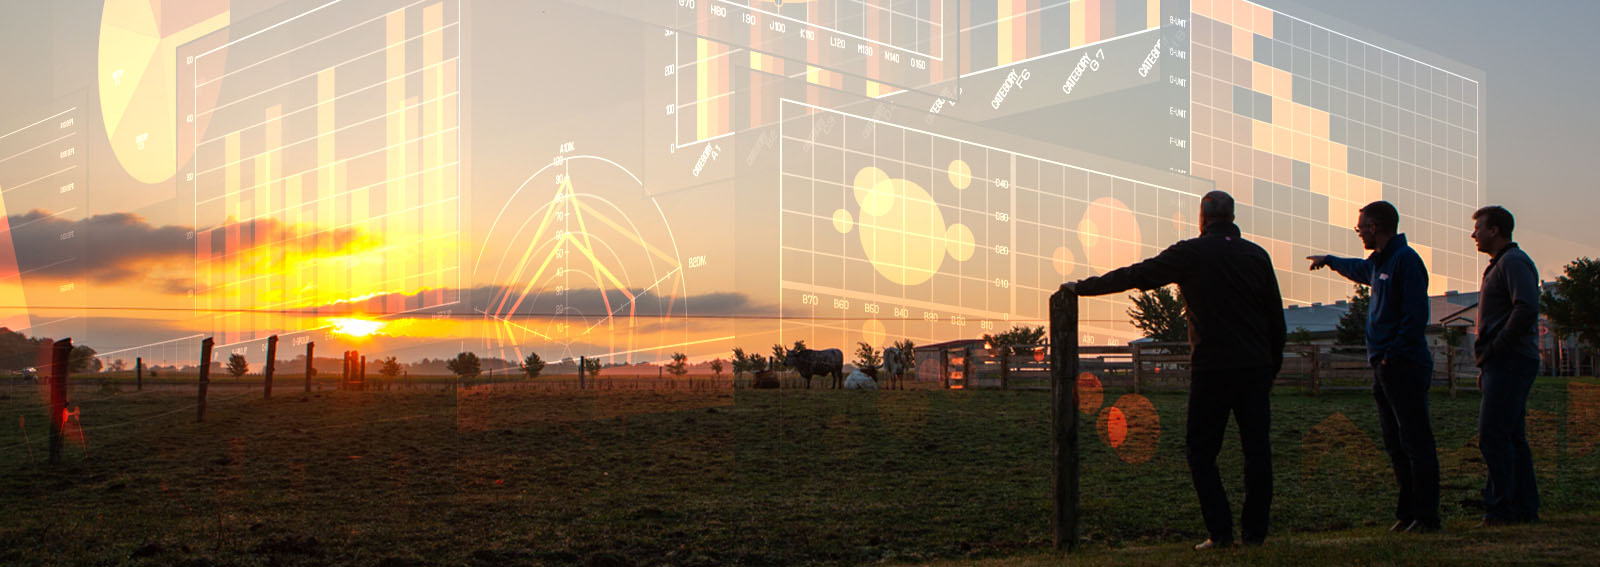 Three farmers looking out into a farm field with graph overlays on top of the image.